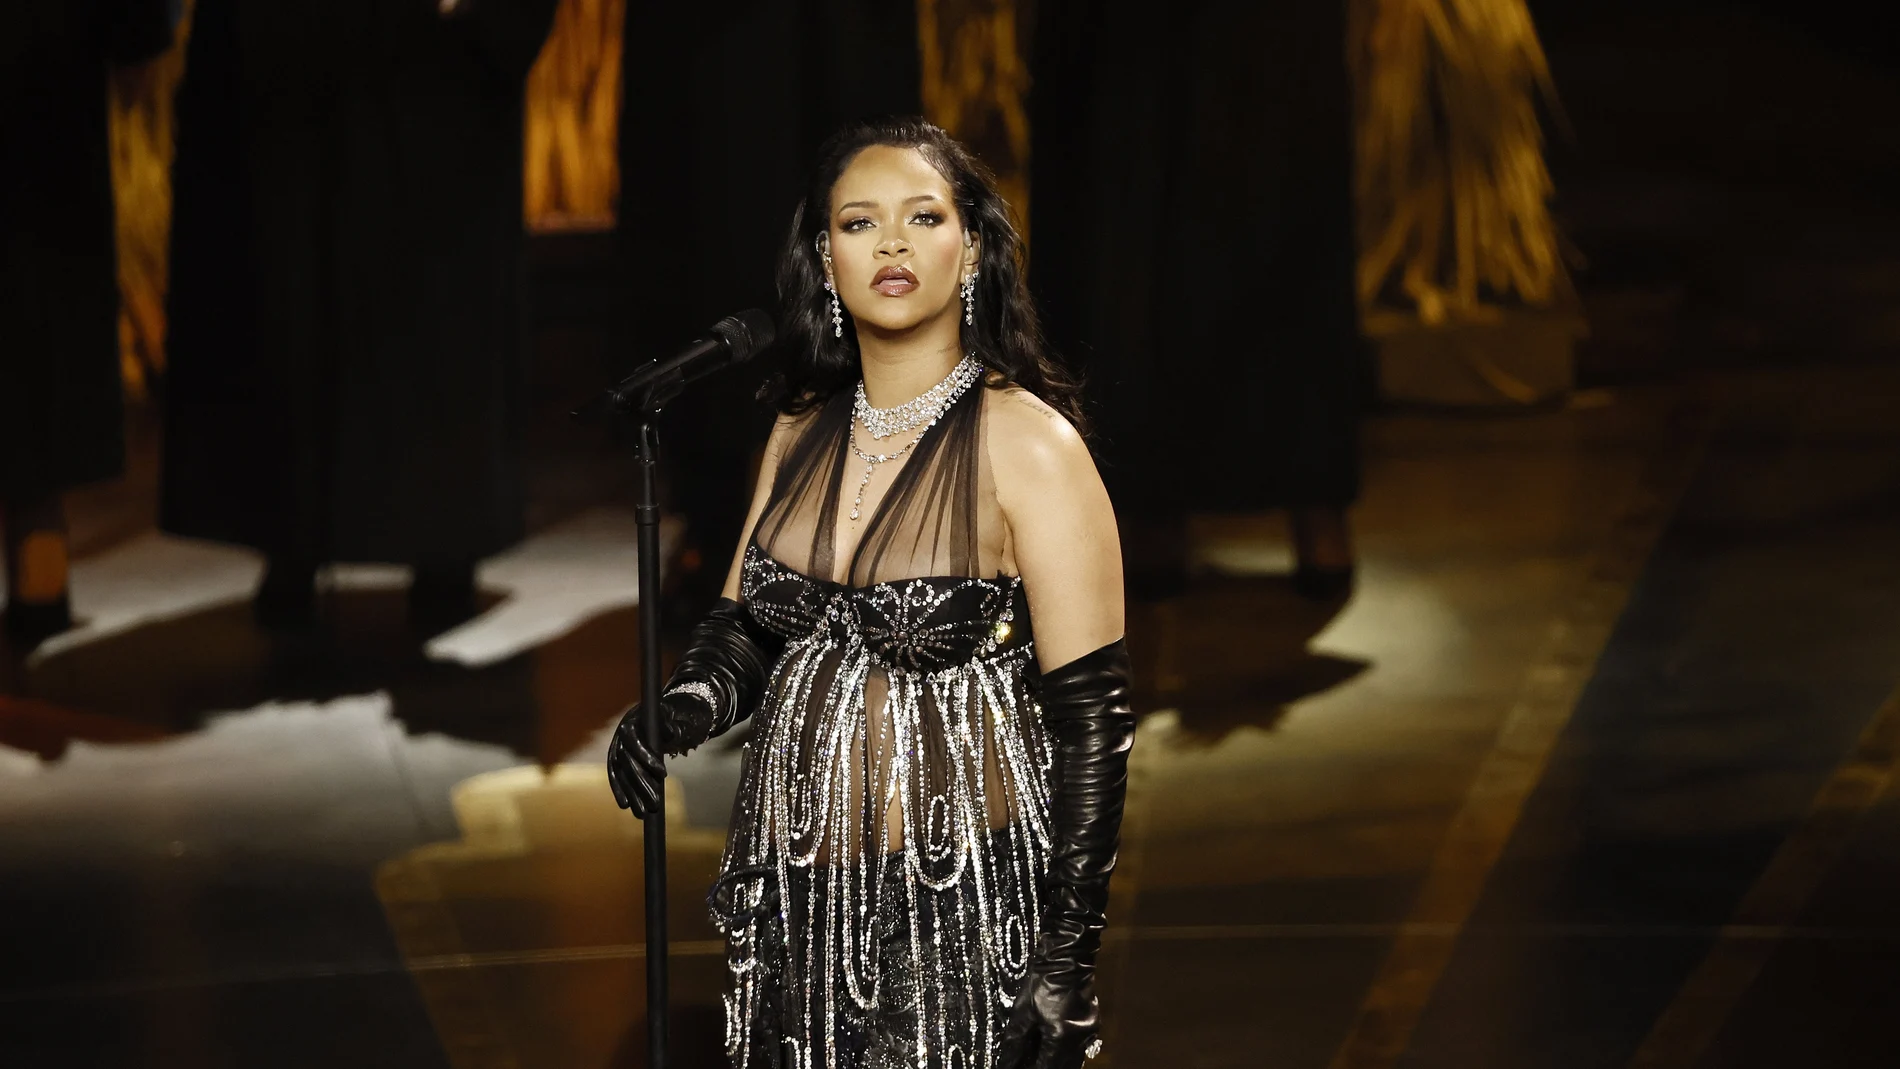 Rihanna performs during the 95th annual Academy Awards ceremony at the Dolby Theatre in Hollywood, Los Angeles, California, USA, 12 March 2023. The Oscars are presented for outstanding individual or collective efforts in filmmaking in 24 categories.